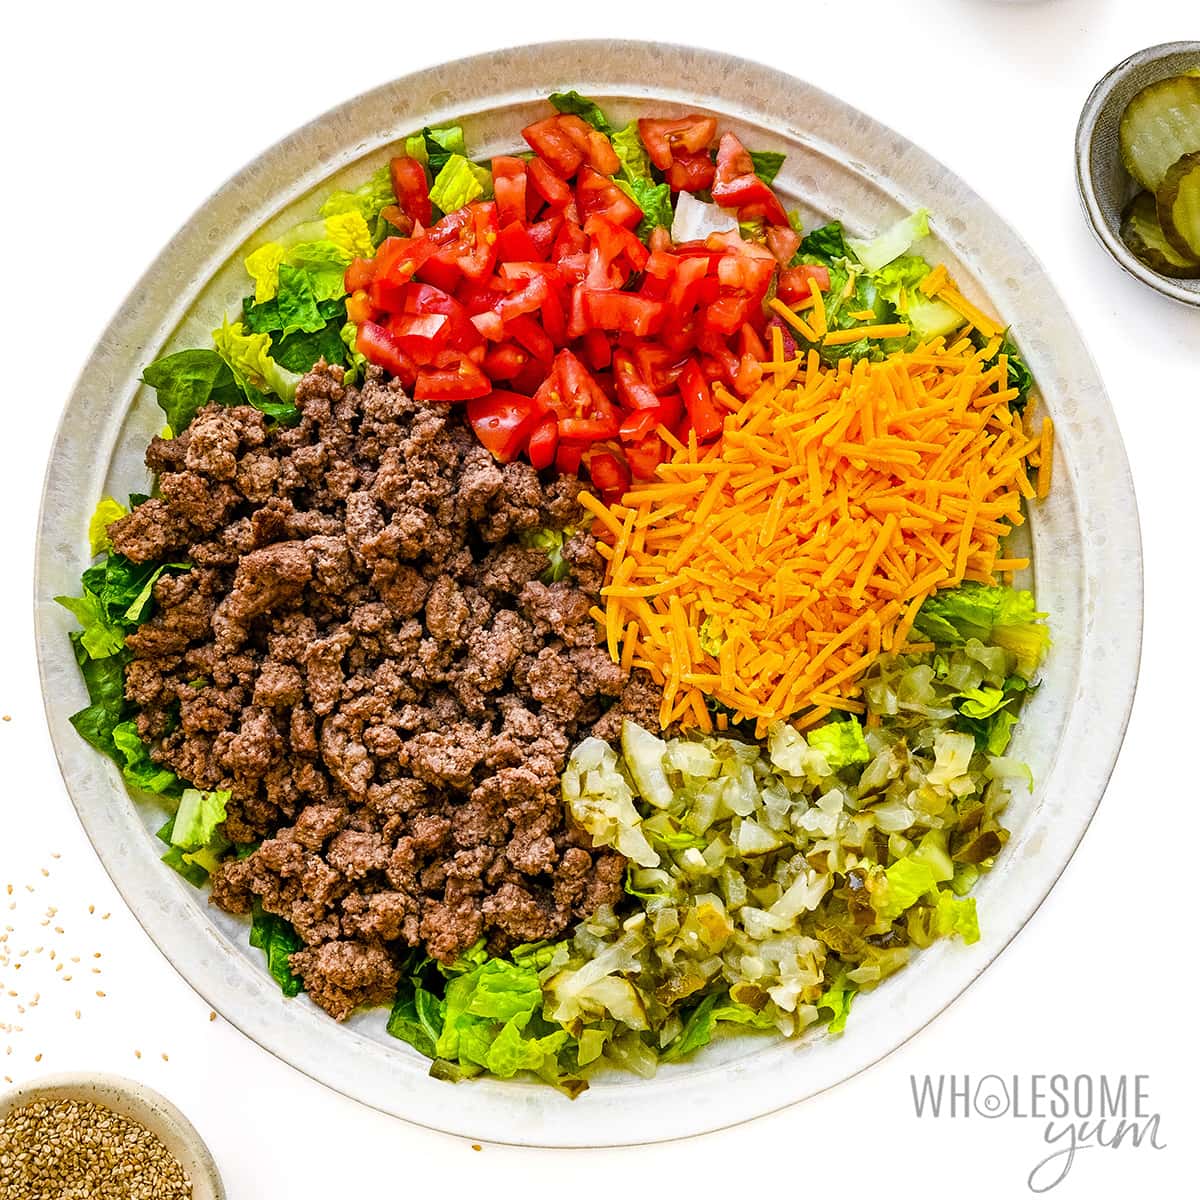 Hamburger salad in a bowl without dressing.